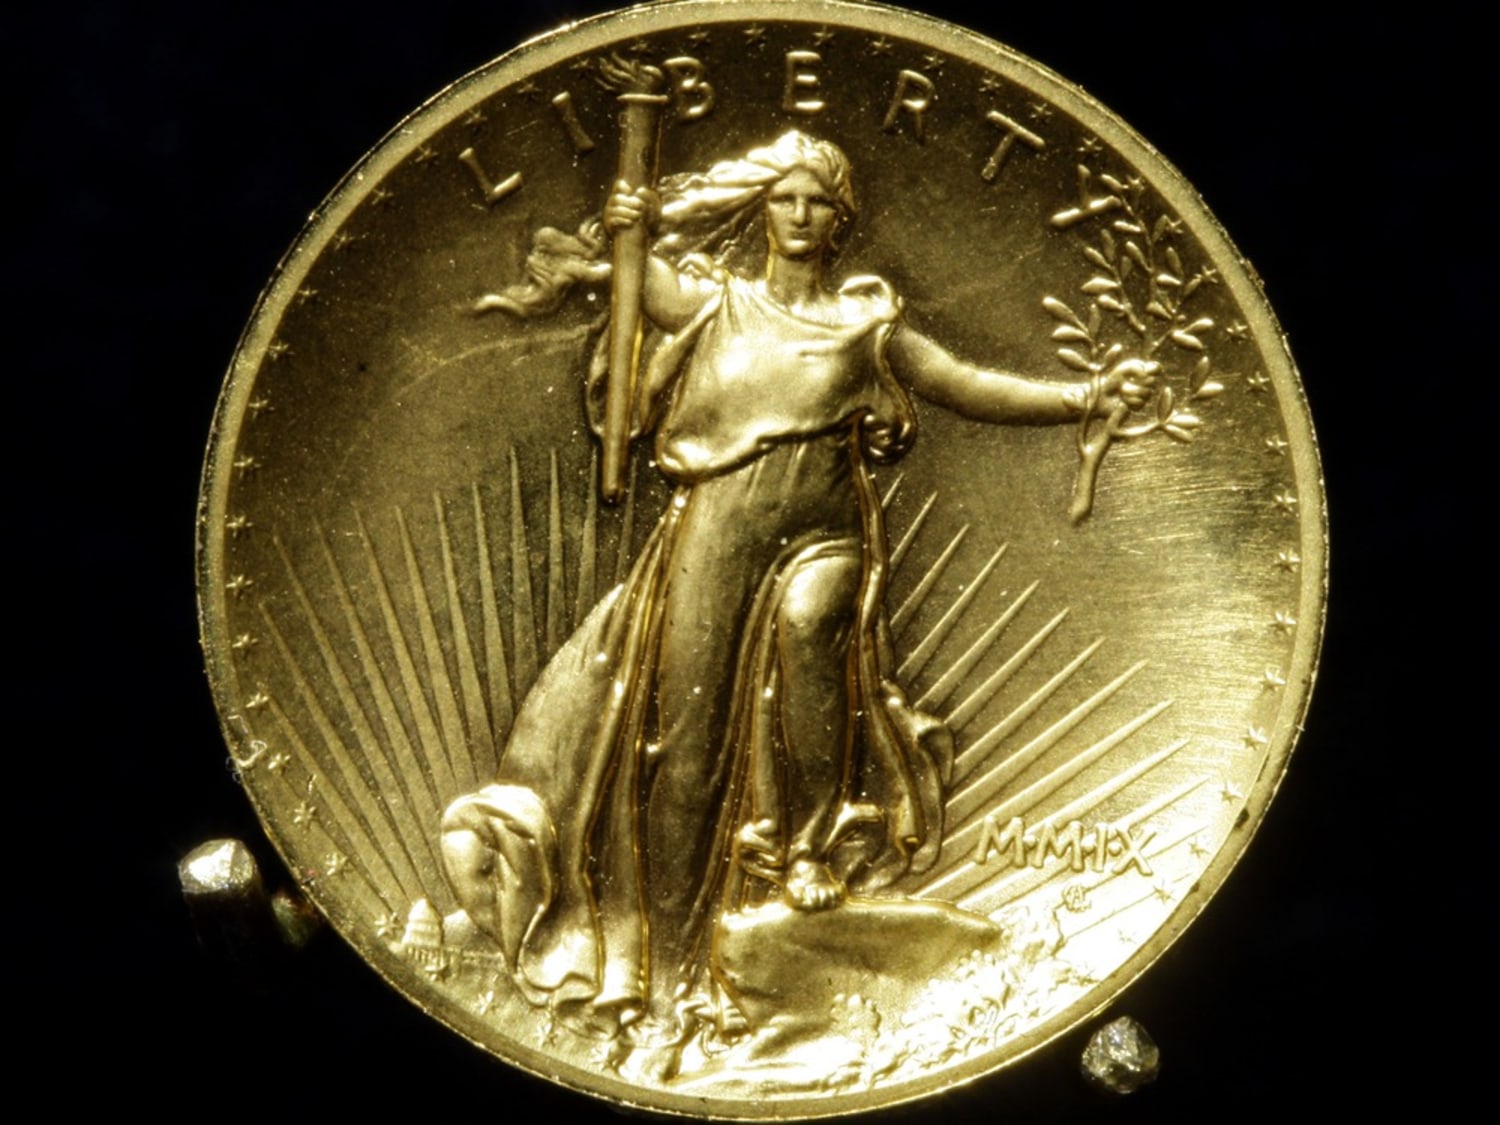 What Makes a Rare Coin Worth Up To $19 Million?